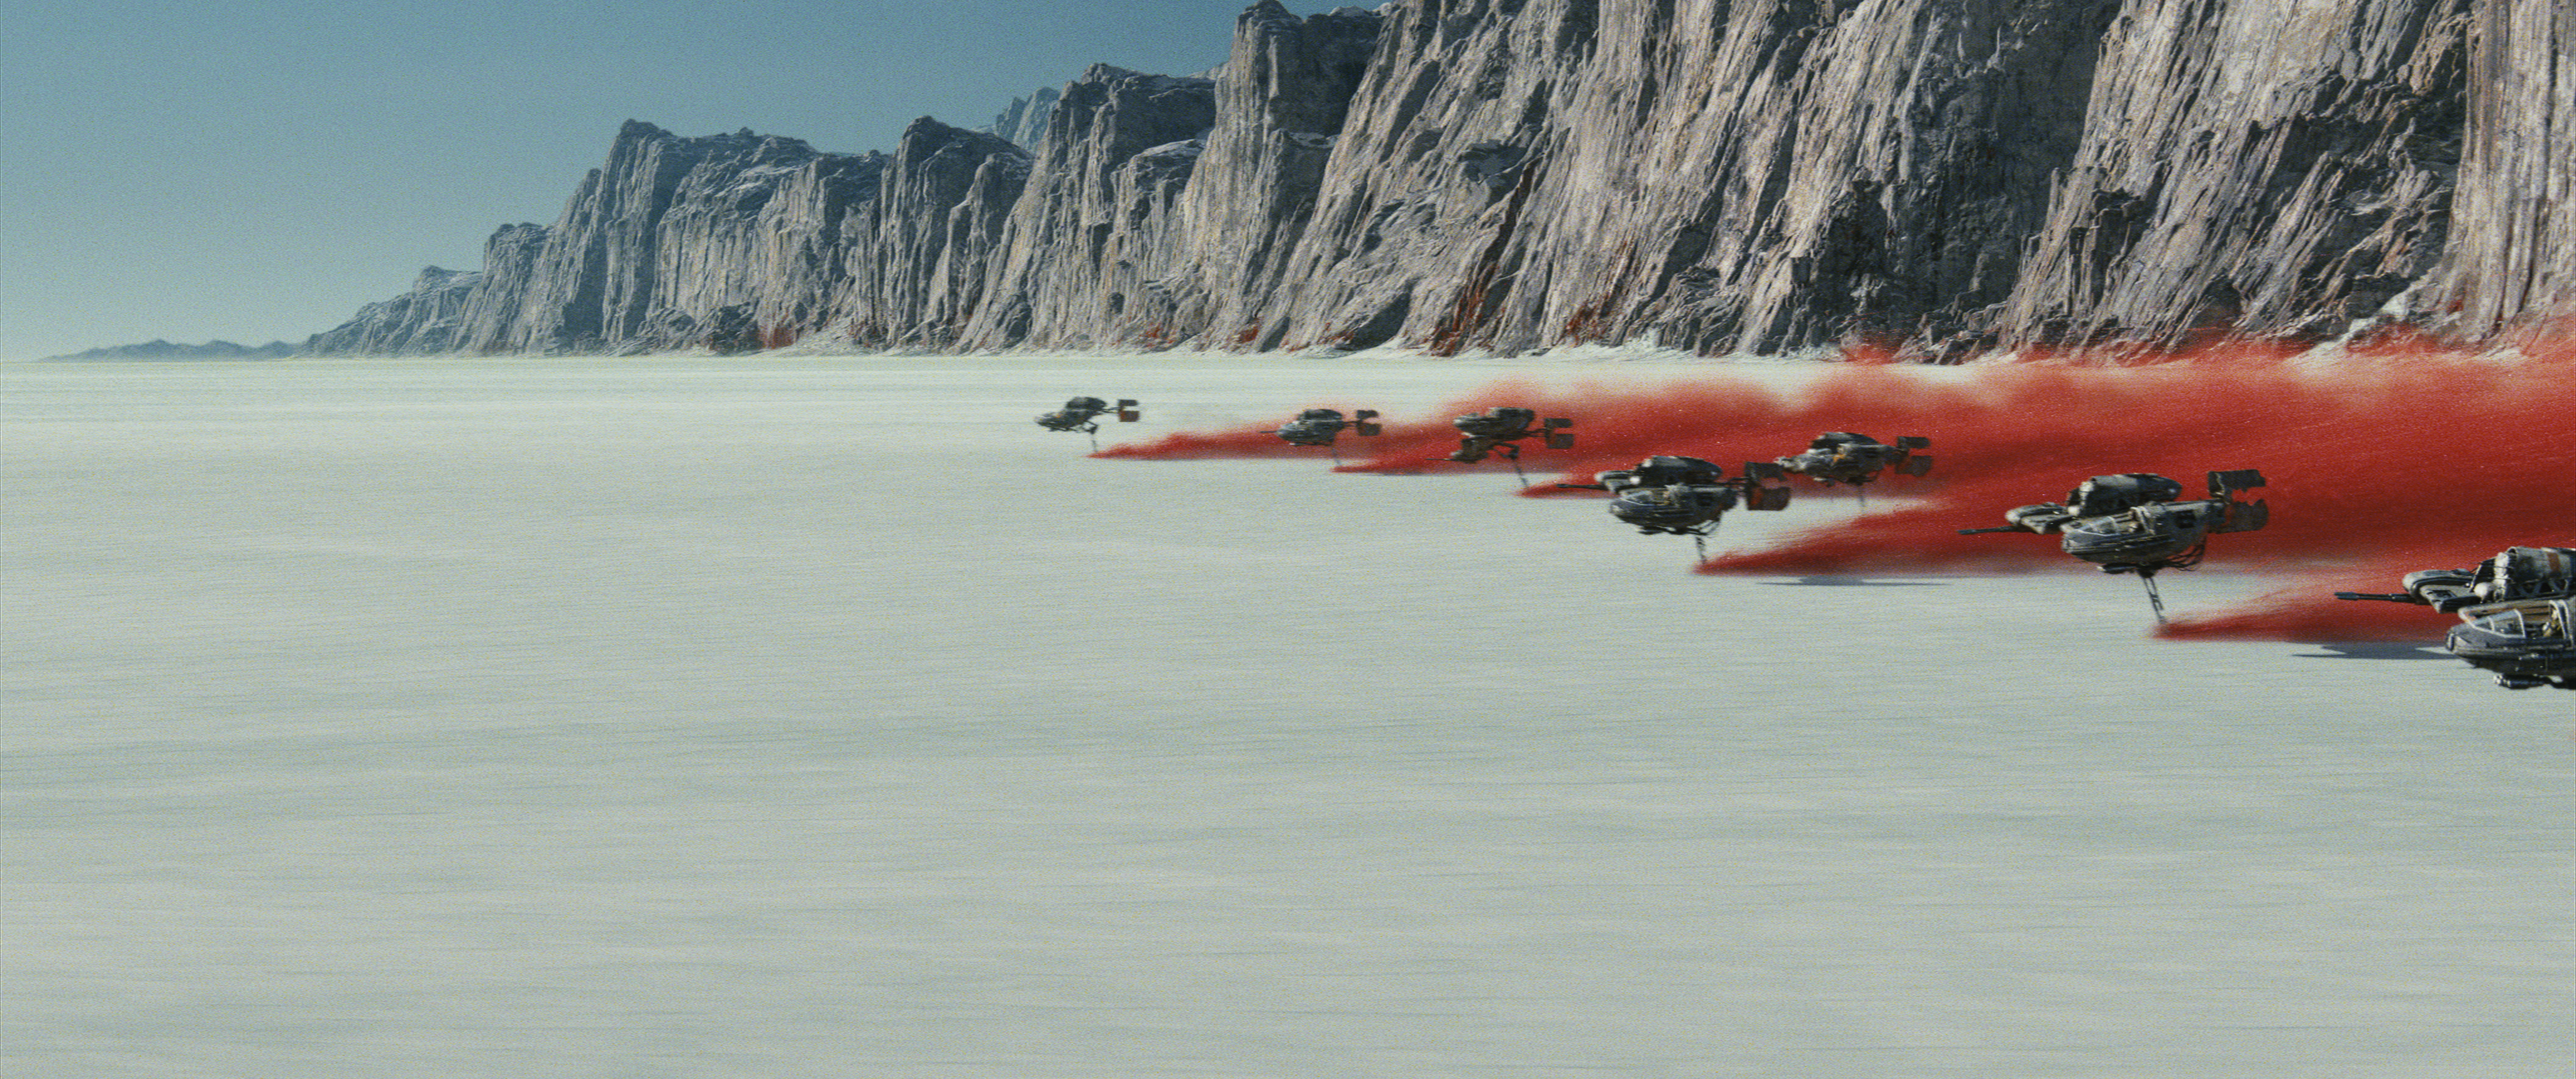 In 'Star Wars: The Last Jedi', the Resistance Keeps Making the